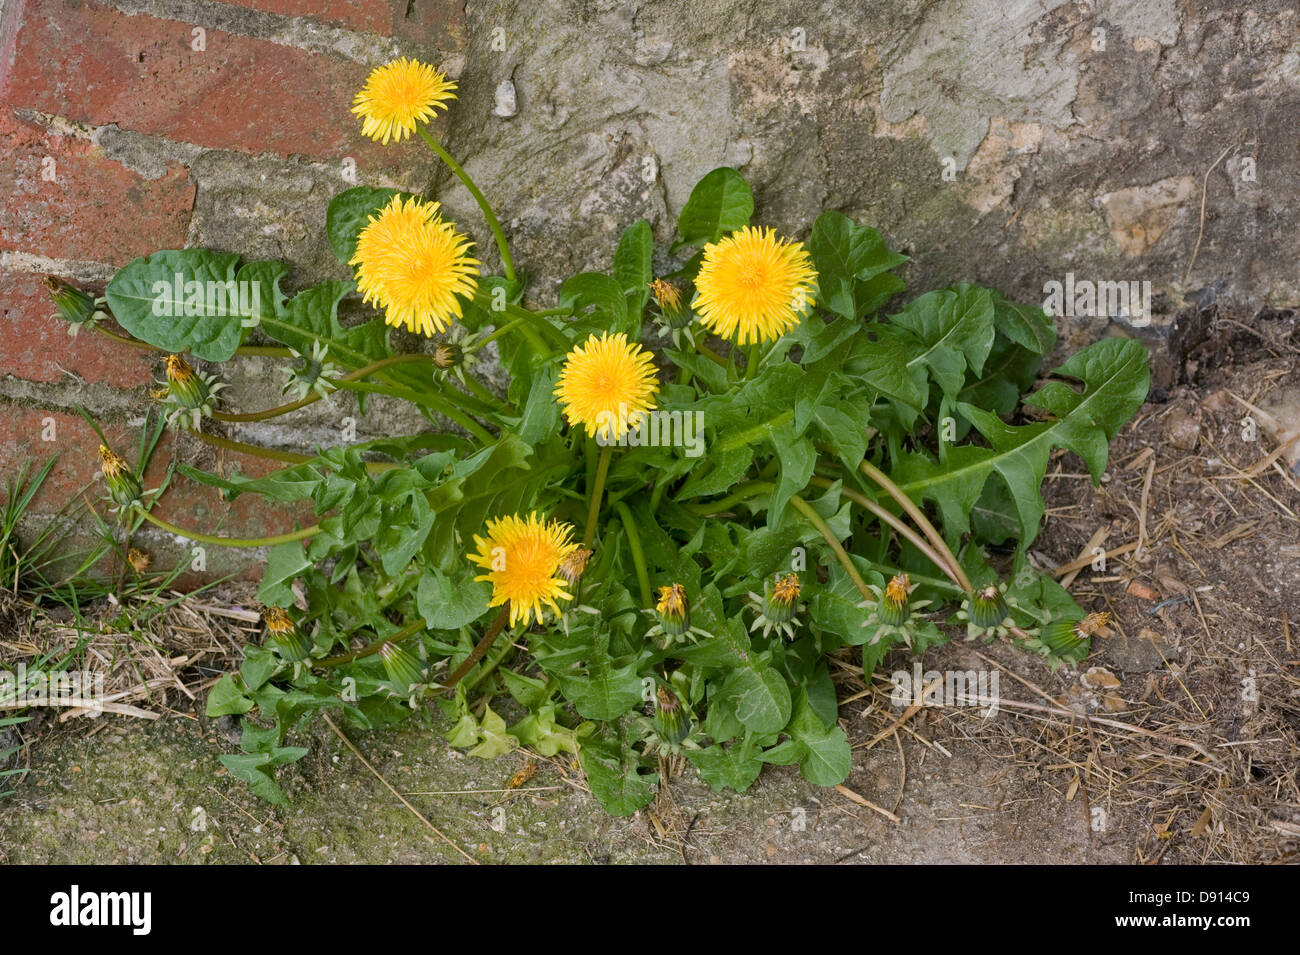 Dandelion, Taraxacum officinale, flowering plant at the base of a brick and stone wall Stock Photo